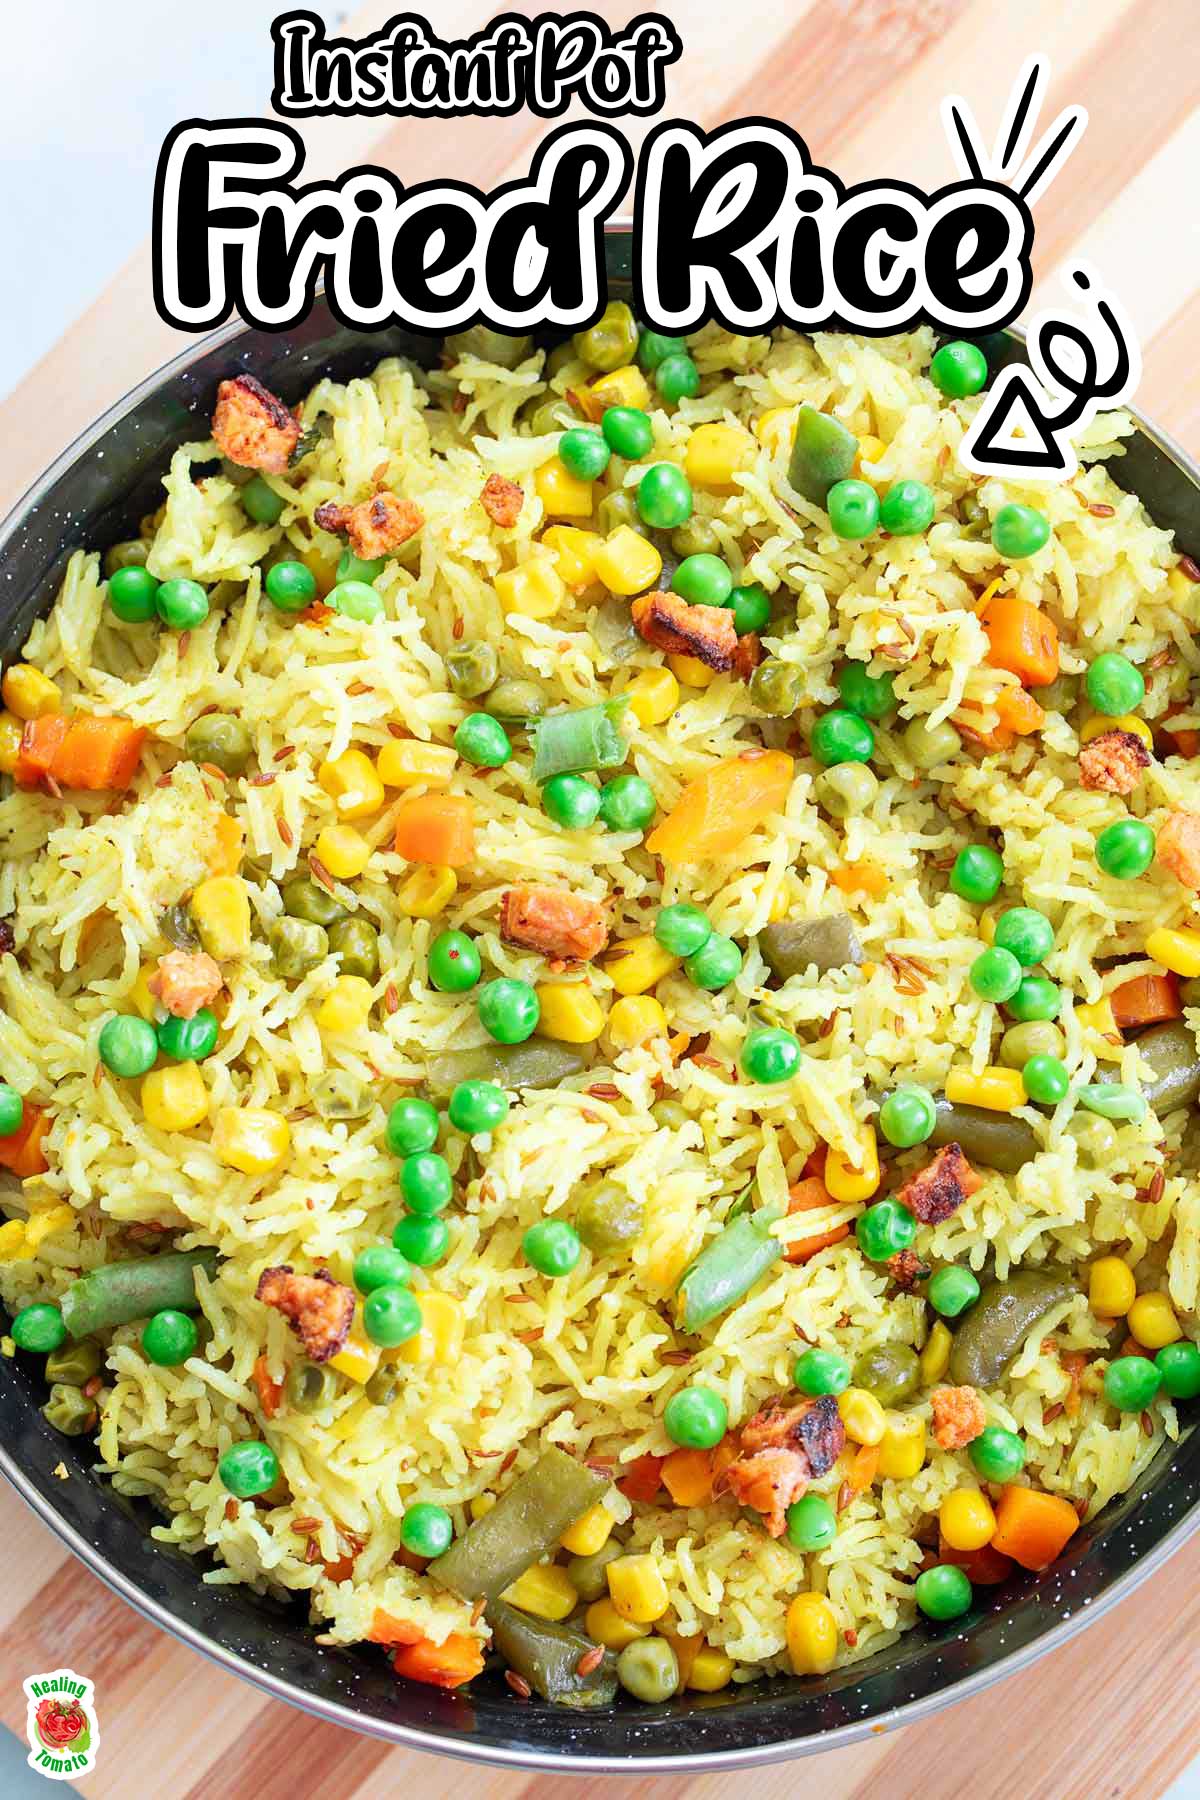 Closeup view of rice and veggies in a black pan